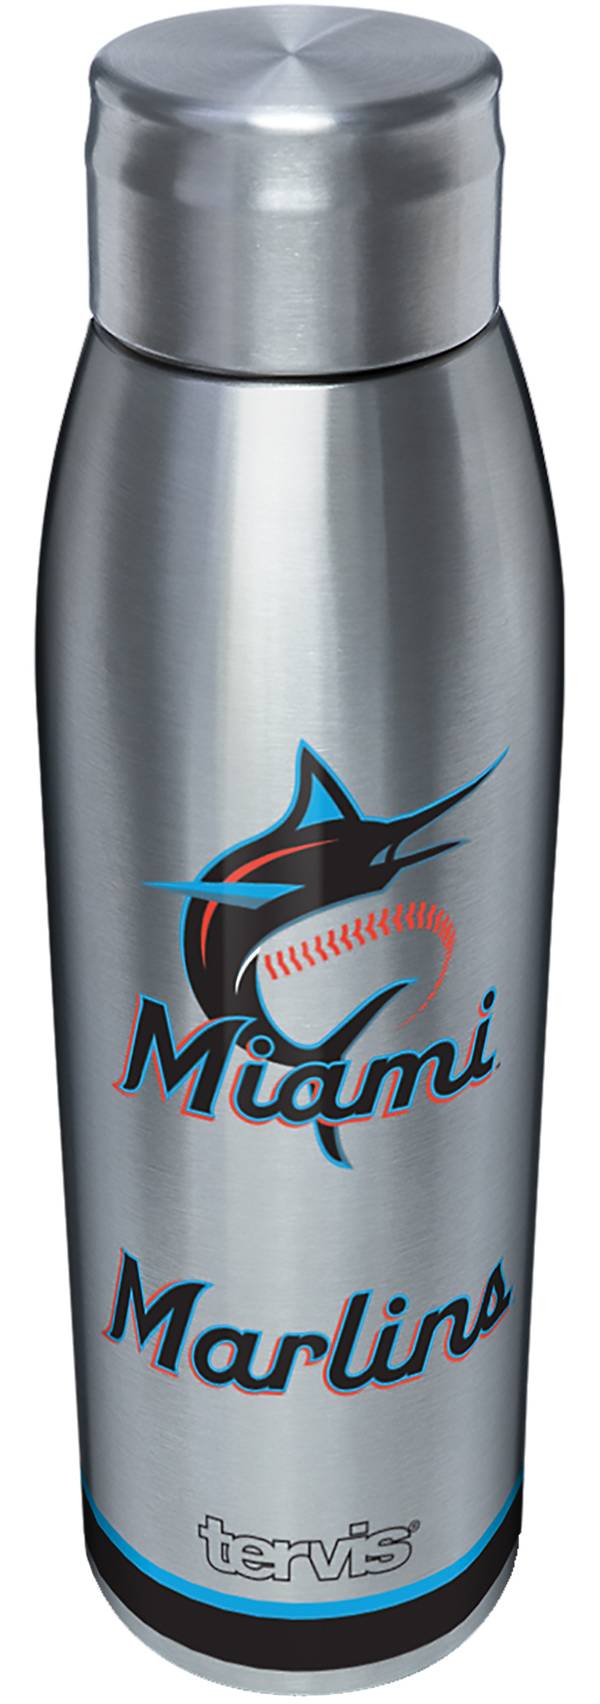 Tervis Miami Marlins 17oz. Water Bottle product image